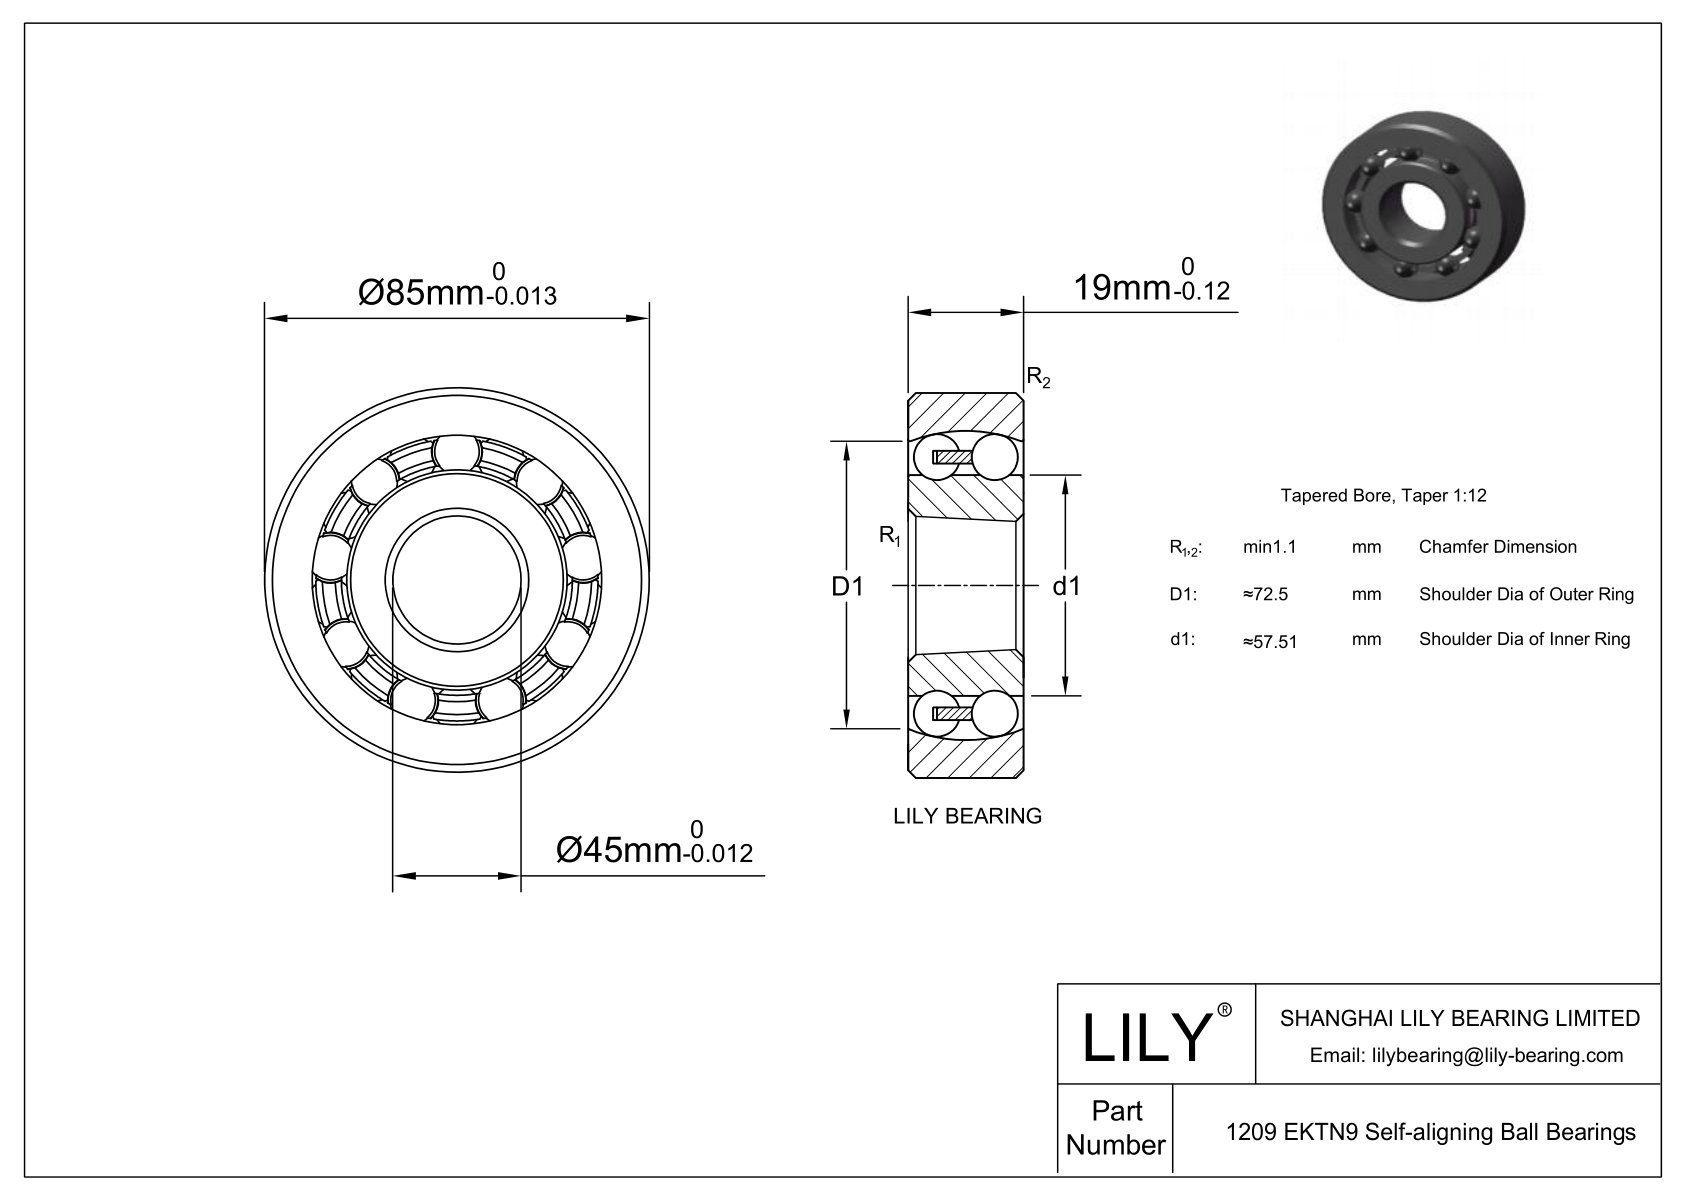 CE1209SC Silicon Carbide Self Aligning Ball Bearings cad drawing